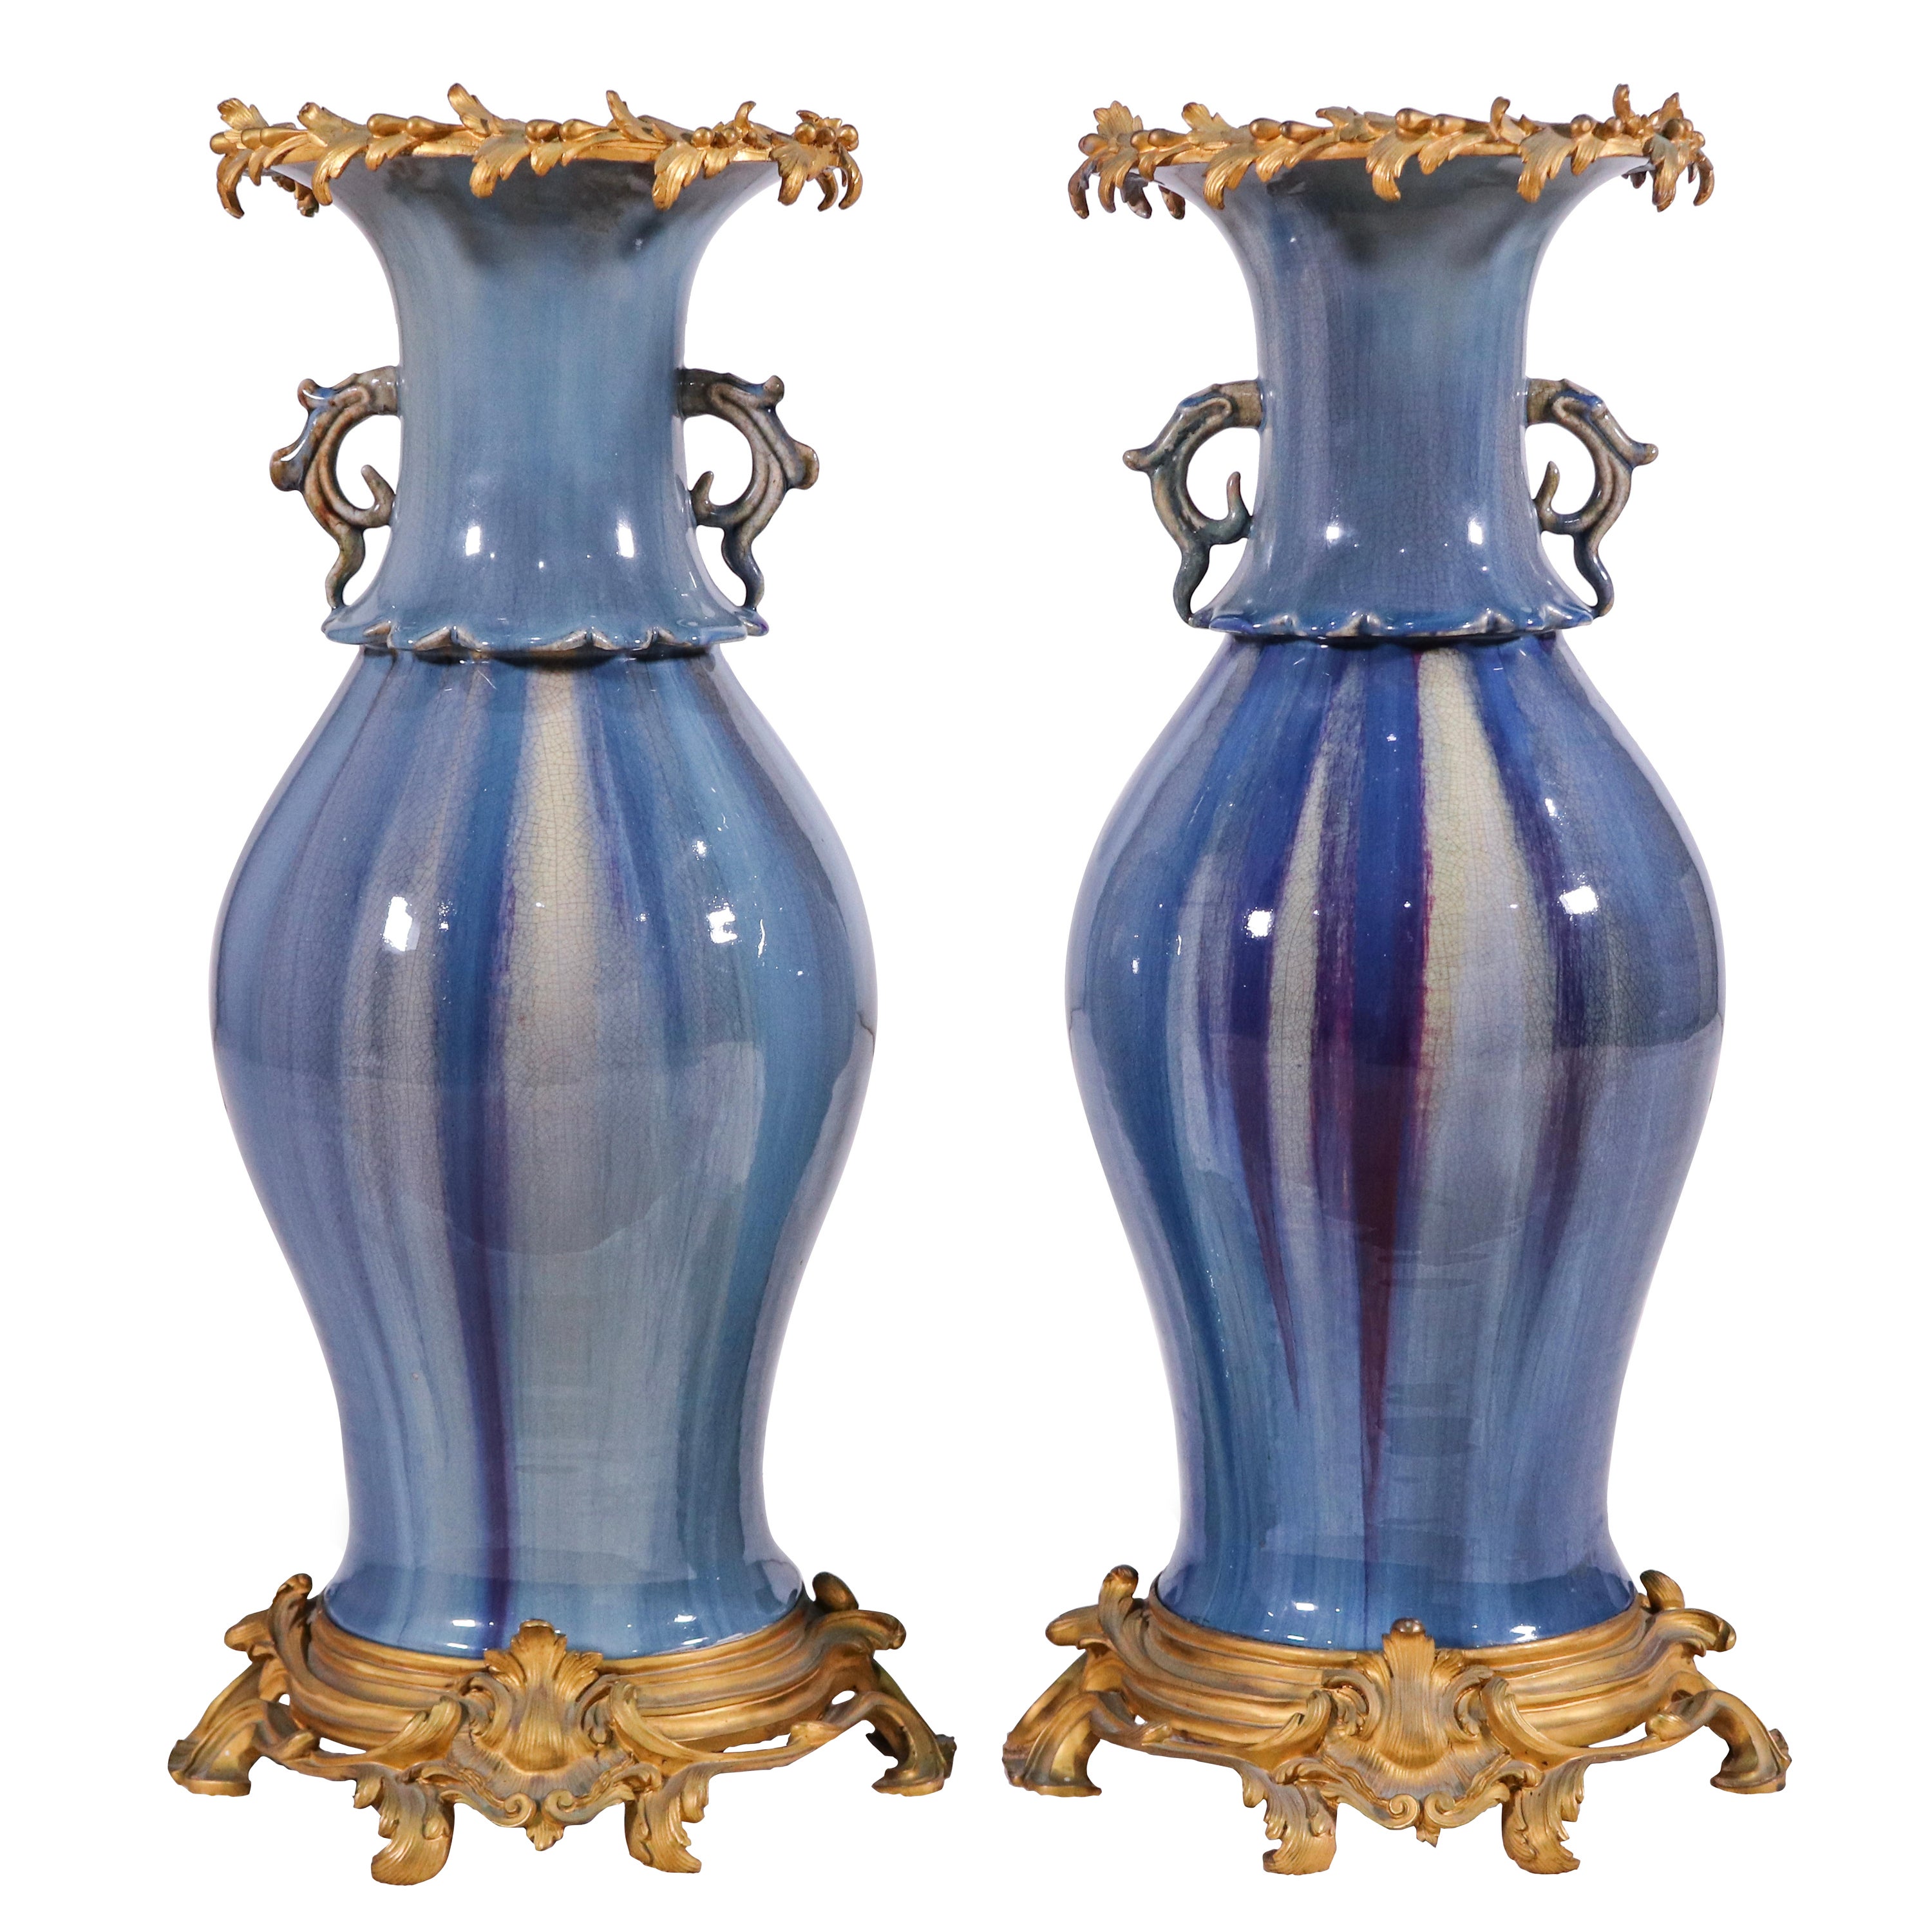 Pair of Chinese Blue Flambé Glazed Ceramic Vases with French Ormolu Mounts For Sale